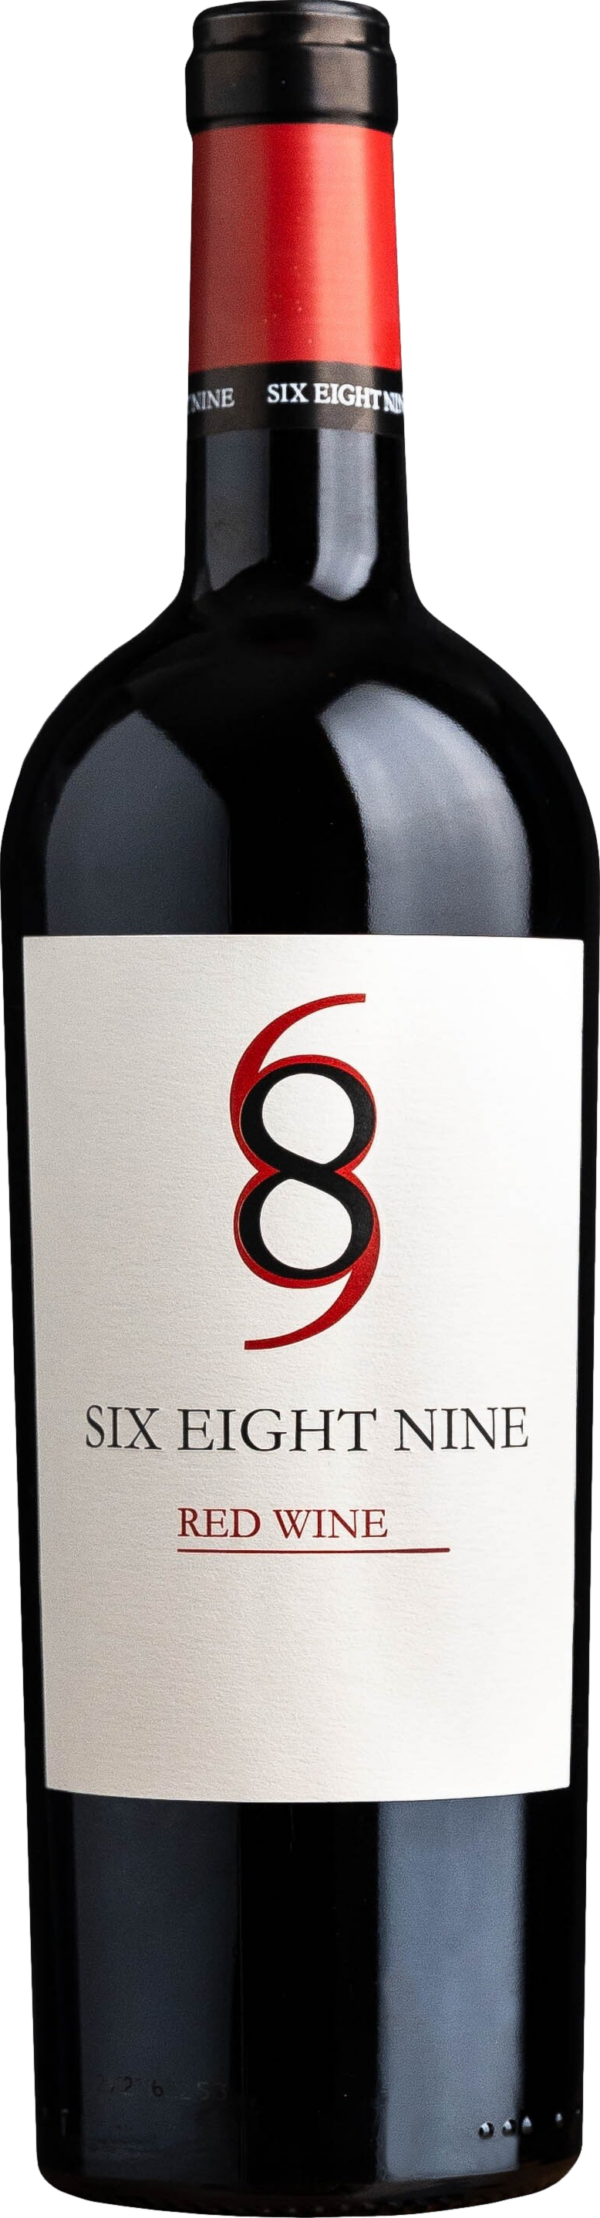 Product image of 689 Cellars Six Eight Nine Red 2021 from 8wines